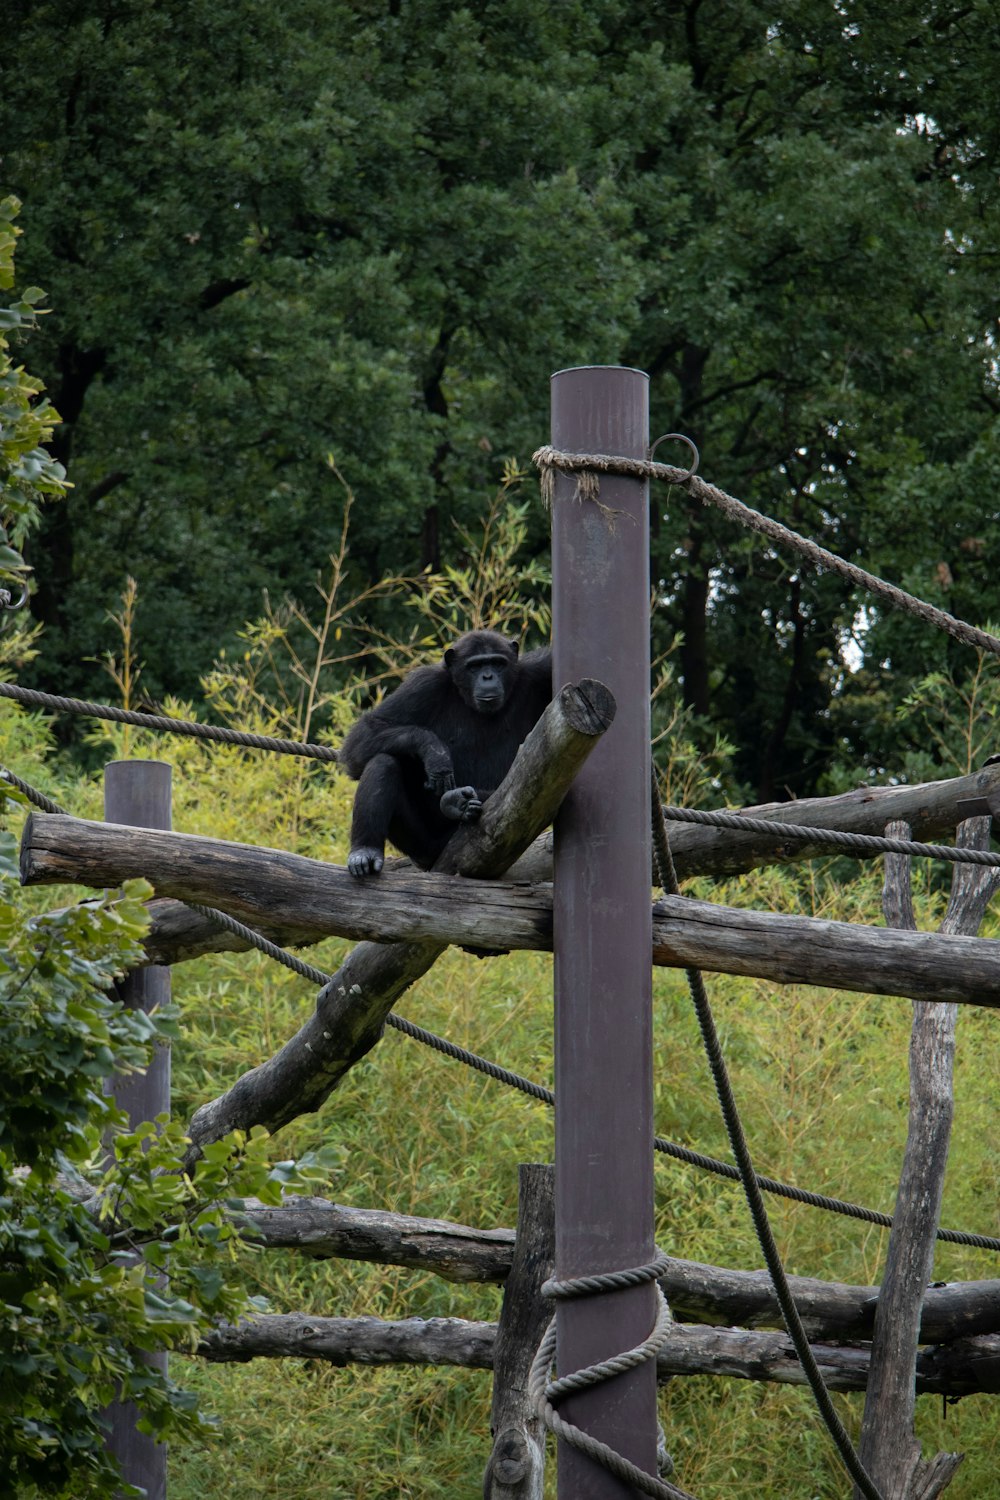 a black bear sitting on top of a wooden fence